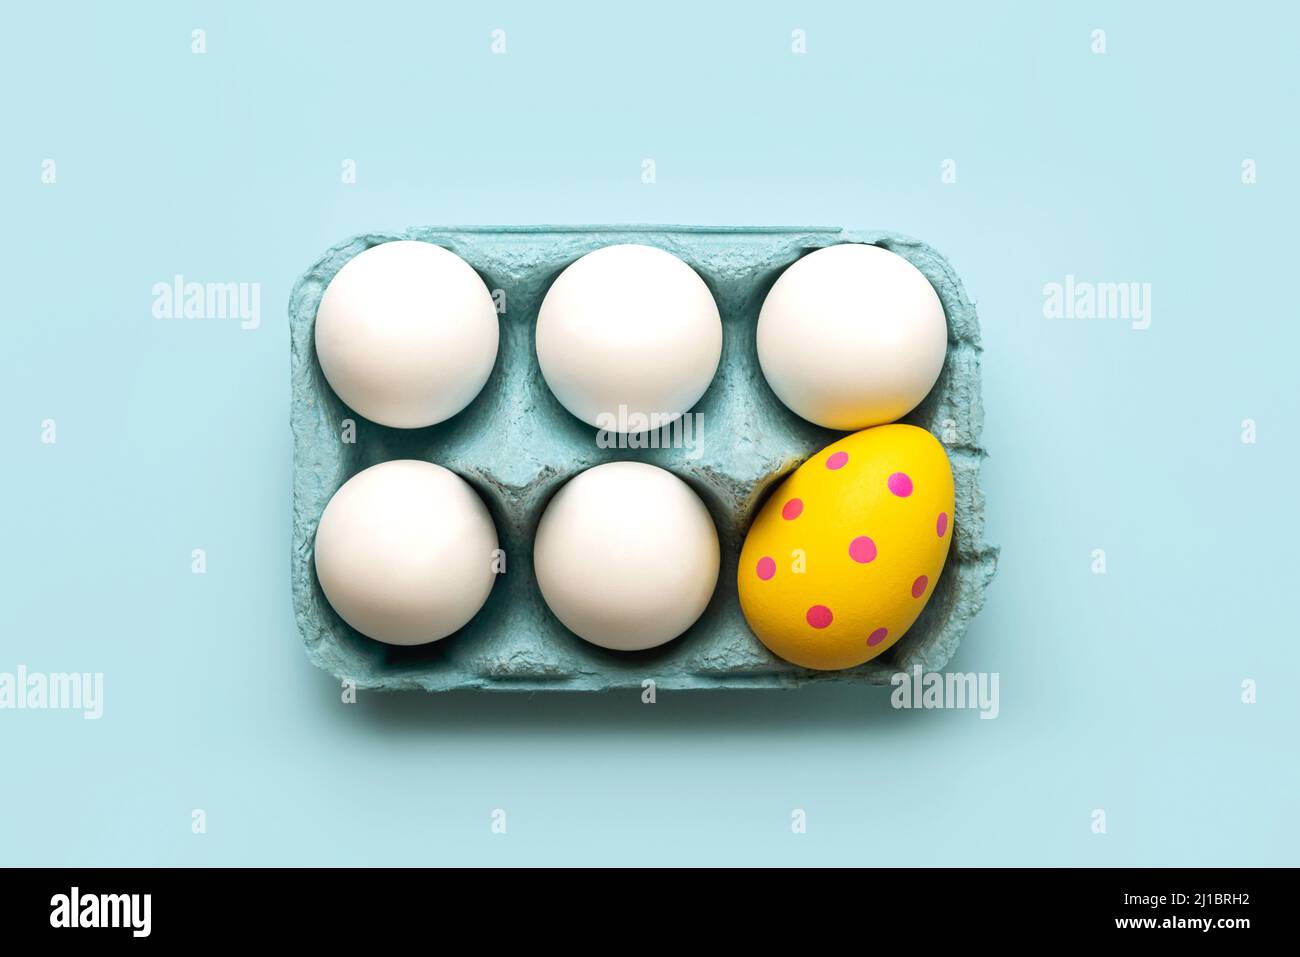 Happy Easter. Top view of chicken eggs and easter painted egg in an open blue cardboard box over blue background Stock Photo